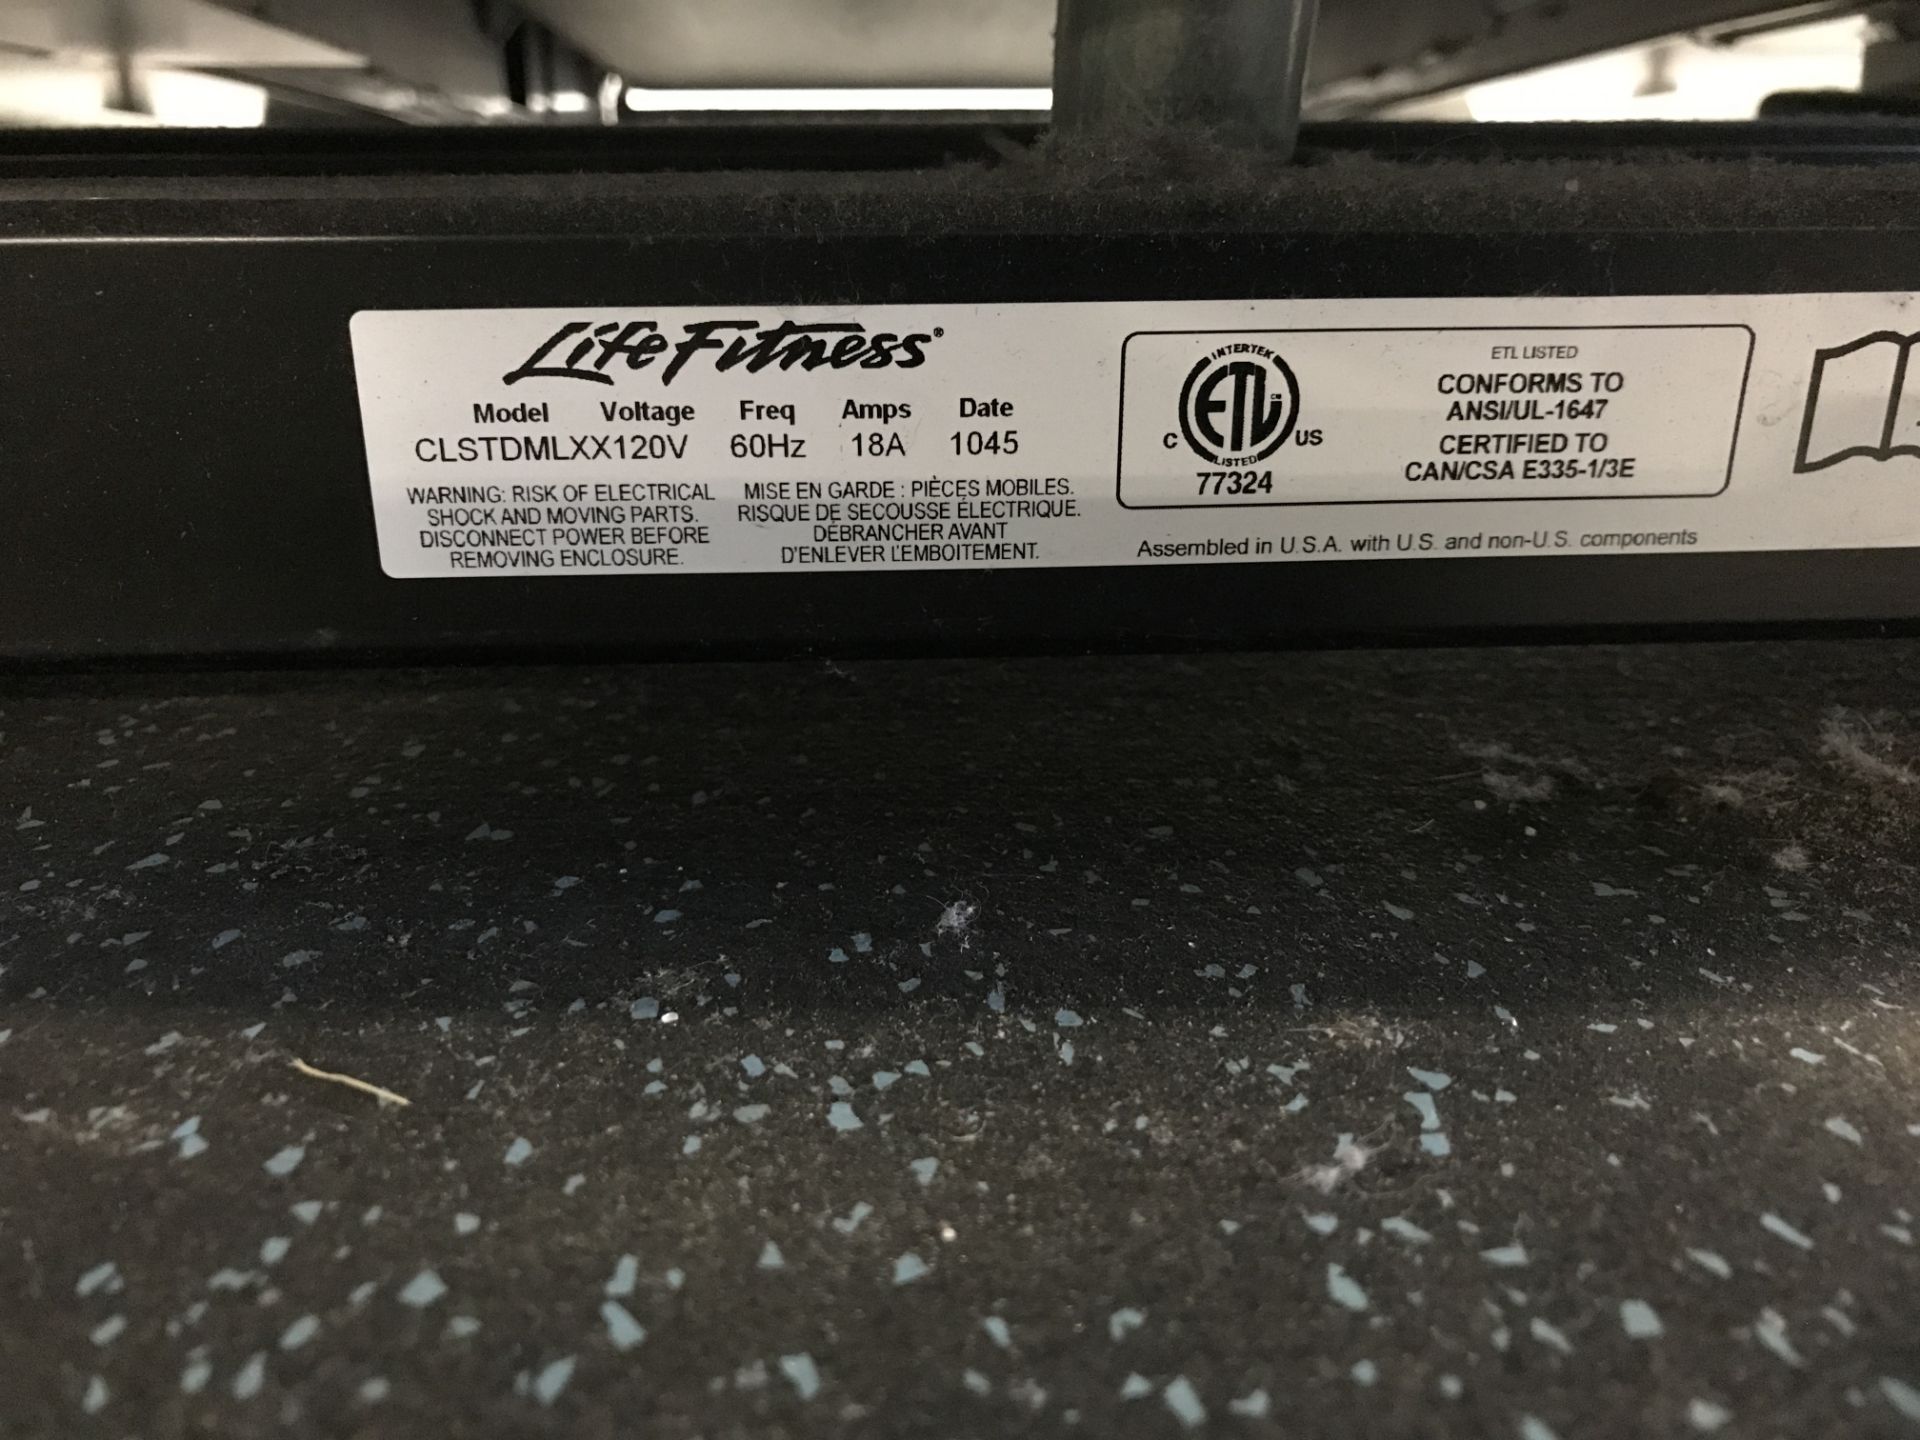 Life Fitness Flex Deck Treadmill #CLSTDMLXX (See Pic for Info Plate) w/Programmable Controls, - Image 4 of 5